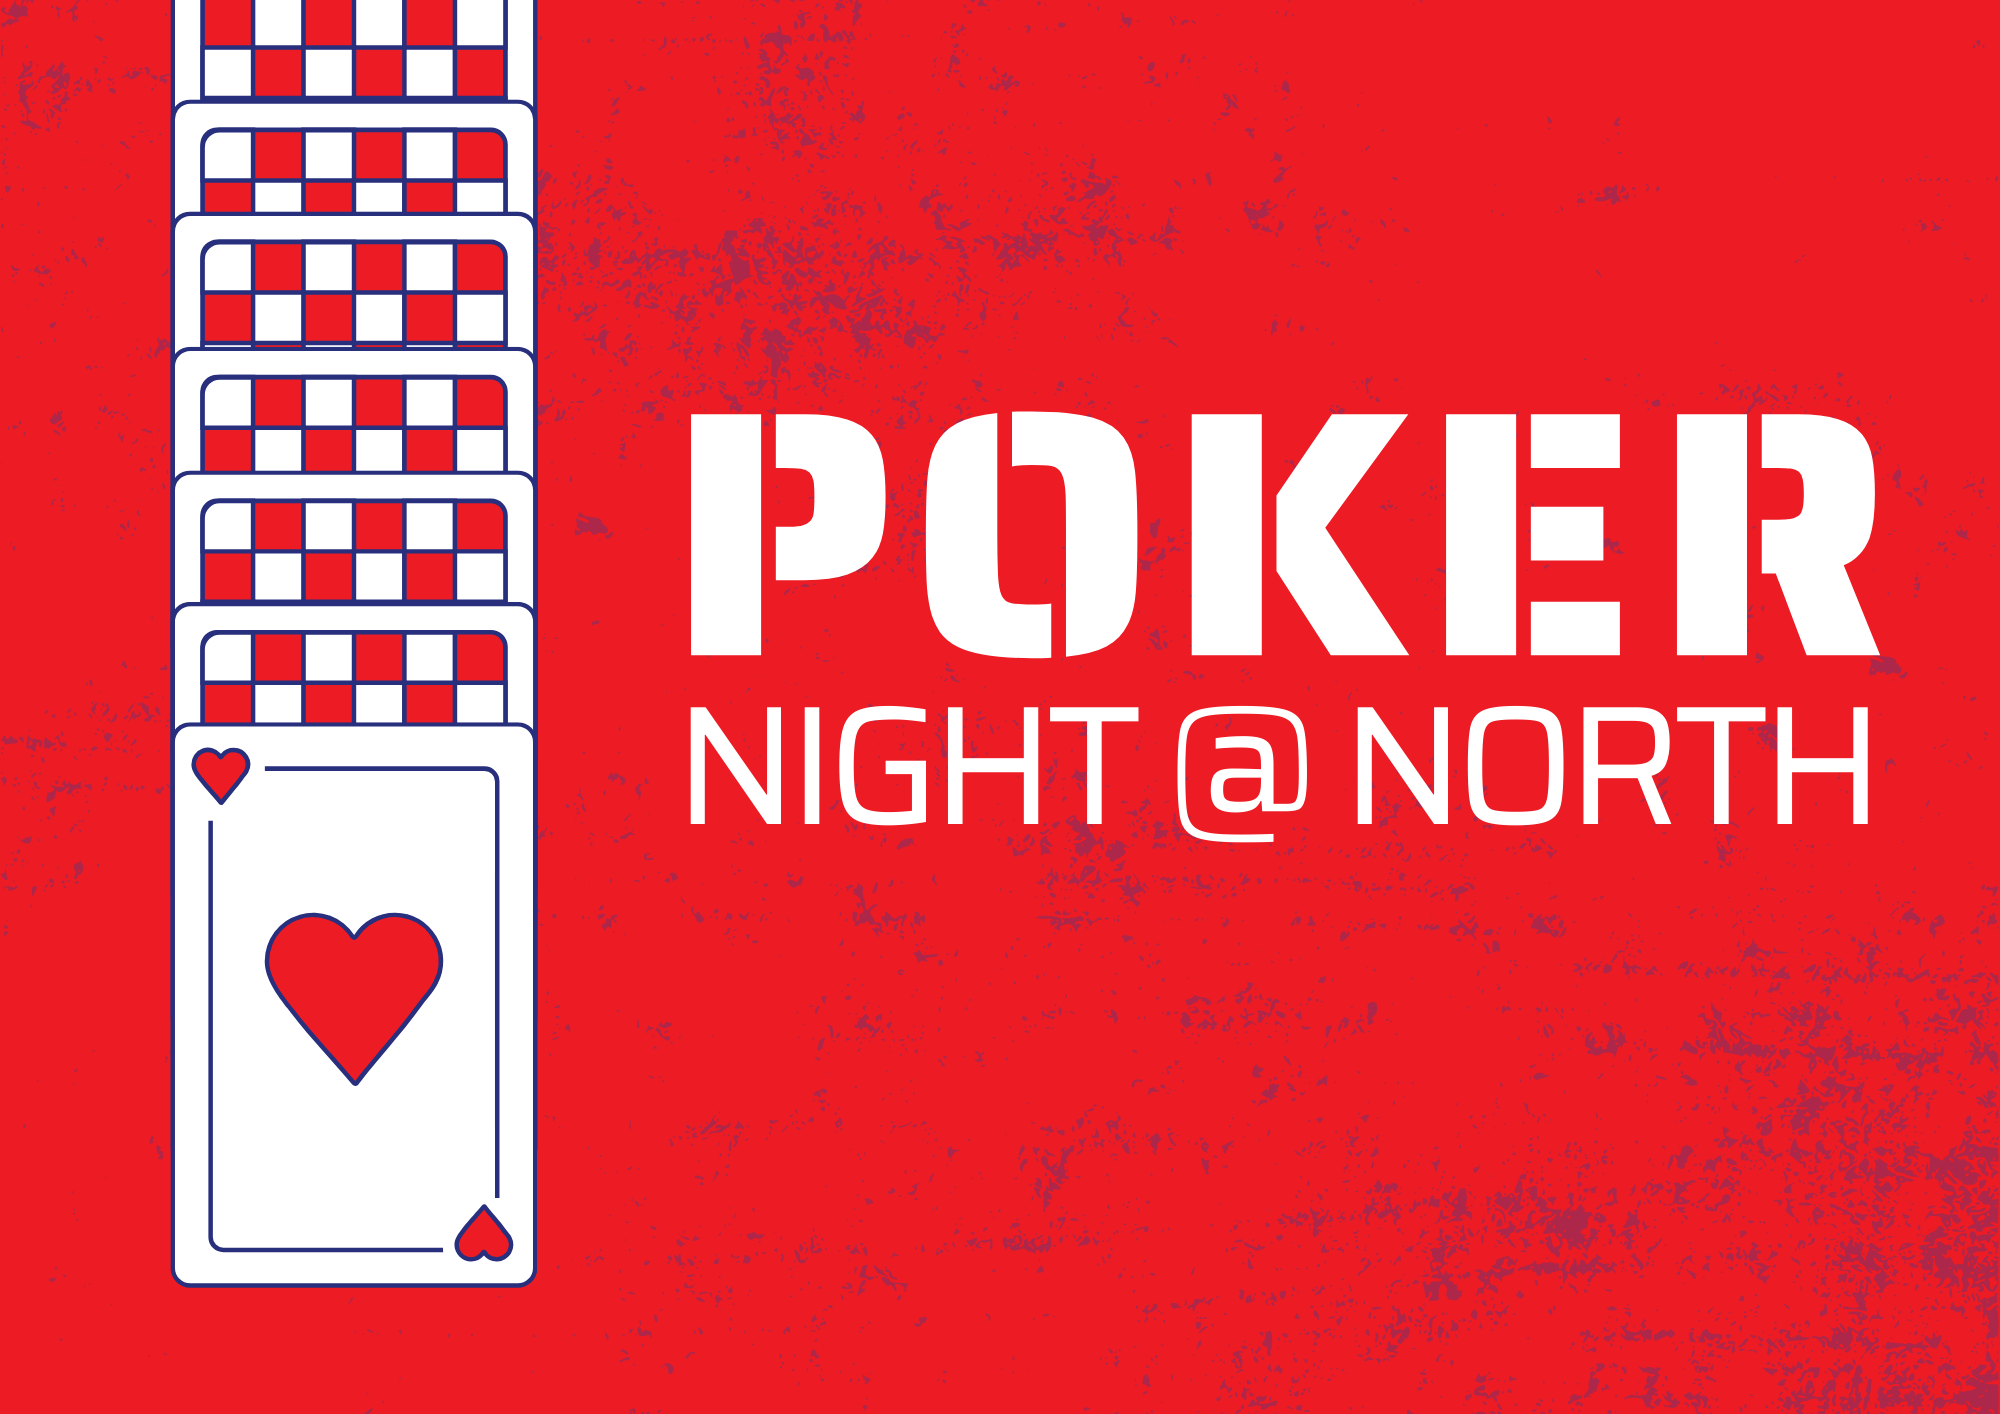 Join us for our Poker Night!